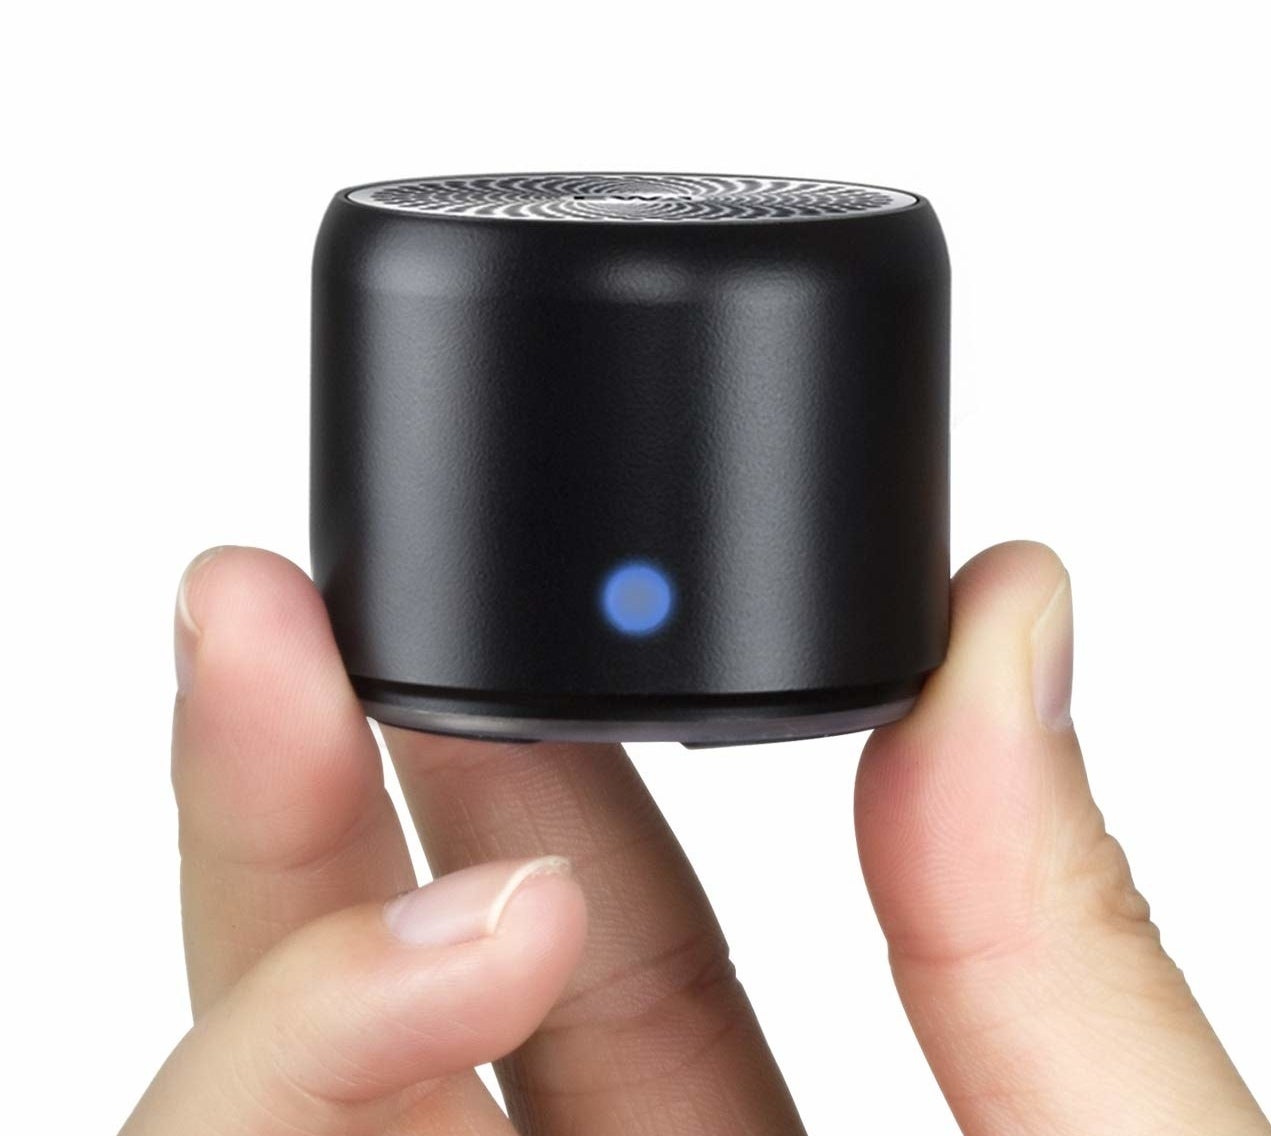 A person holding the small cylindrical speaker between their fingers